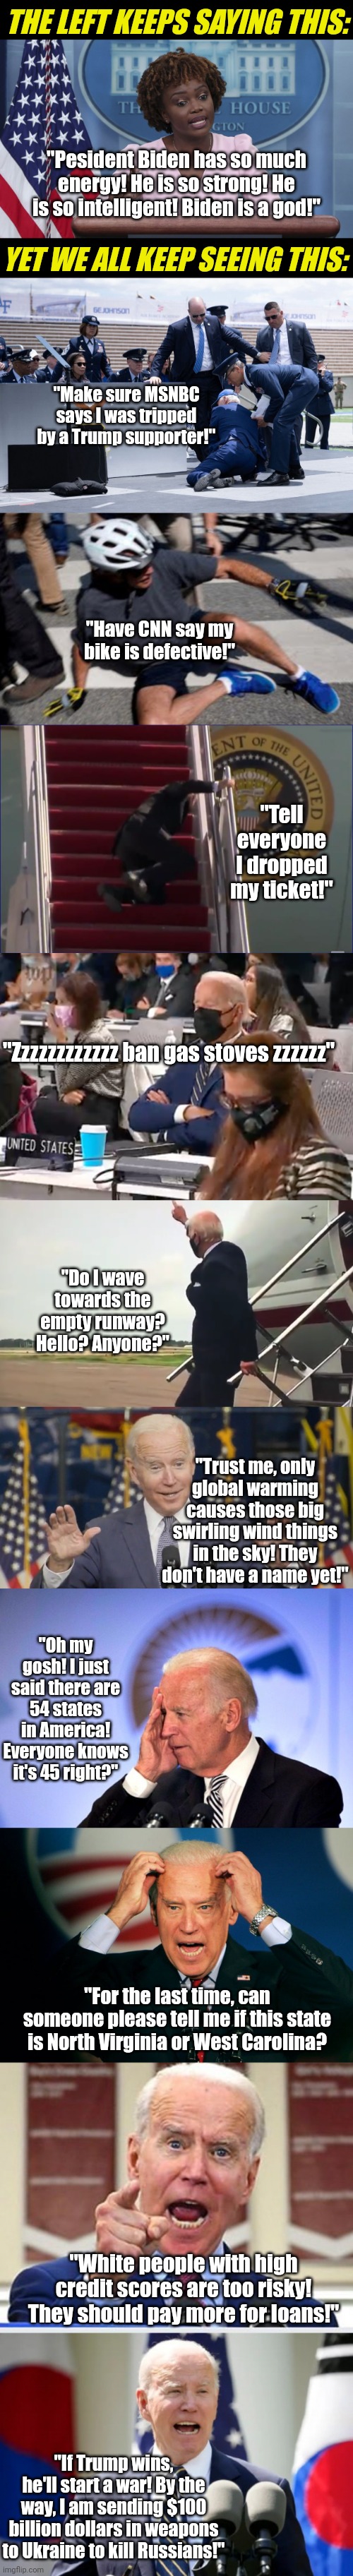 Is anyone else tired of hearing how a senile, frail, geriatric politician is superior in every way to normal people? | THE LEFT KEEPS SAYING THIS:; "Pesident Biden has so much energy! He is so strong! He is so intelligent! Biden is a god!"; YET WE ALL KEEP SEEING THIS:; "Make sure MSNBC says I was tripped by a Trump supporter!"; "Have CNN say my bike is defective!"; "Tell everyone I dropped my ticket!"; "Zzzzzzzzzzzz ban gas stoves zzzzzz"; "Do I wave towards the empty runway? Hello? Anyone?"; "Trust me, only global warming causes those big swirling wind things in the sky! They don't have a name yet!"; "Oh my gosh! I just said there are 54 states in America! Everyone knows it's 45 right?"; "For the last time, can someone please tell me if this state is North Virginia or West Carolina? "White people with high credit scores are too risky! They should pay more for loans!"; "If Trump wins, he'll start a war! By the way, I am sending $100 billion dollars in weapons to Ukraine to kill Russians!" | image tagged in karine jean pierre,biden falls,democratic party,liberal hypocrisy,liars,biased media | made w/ Imgflip meme maker